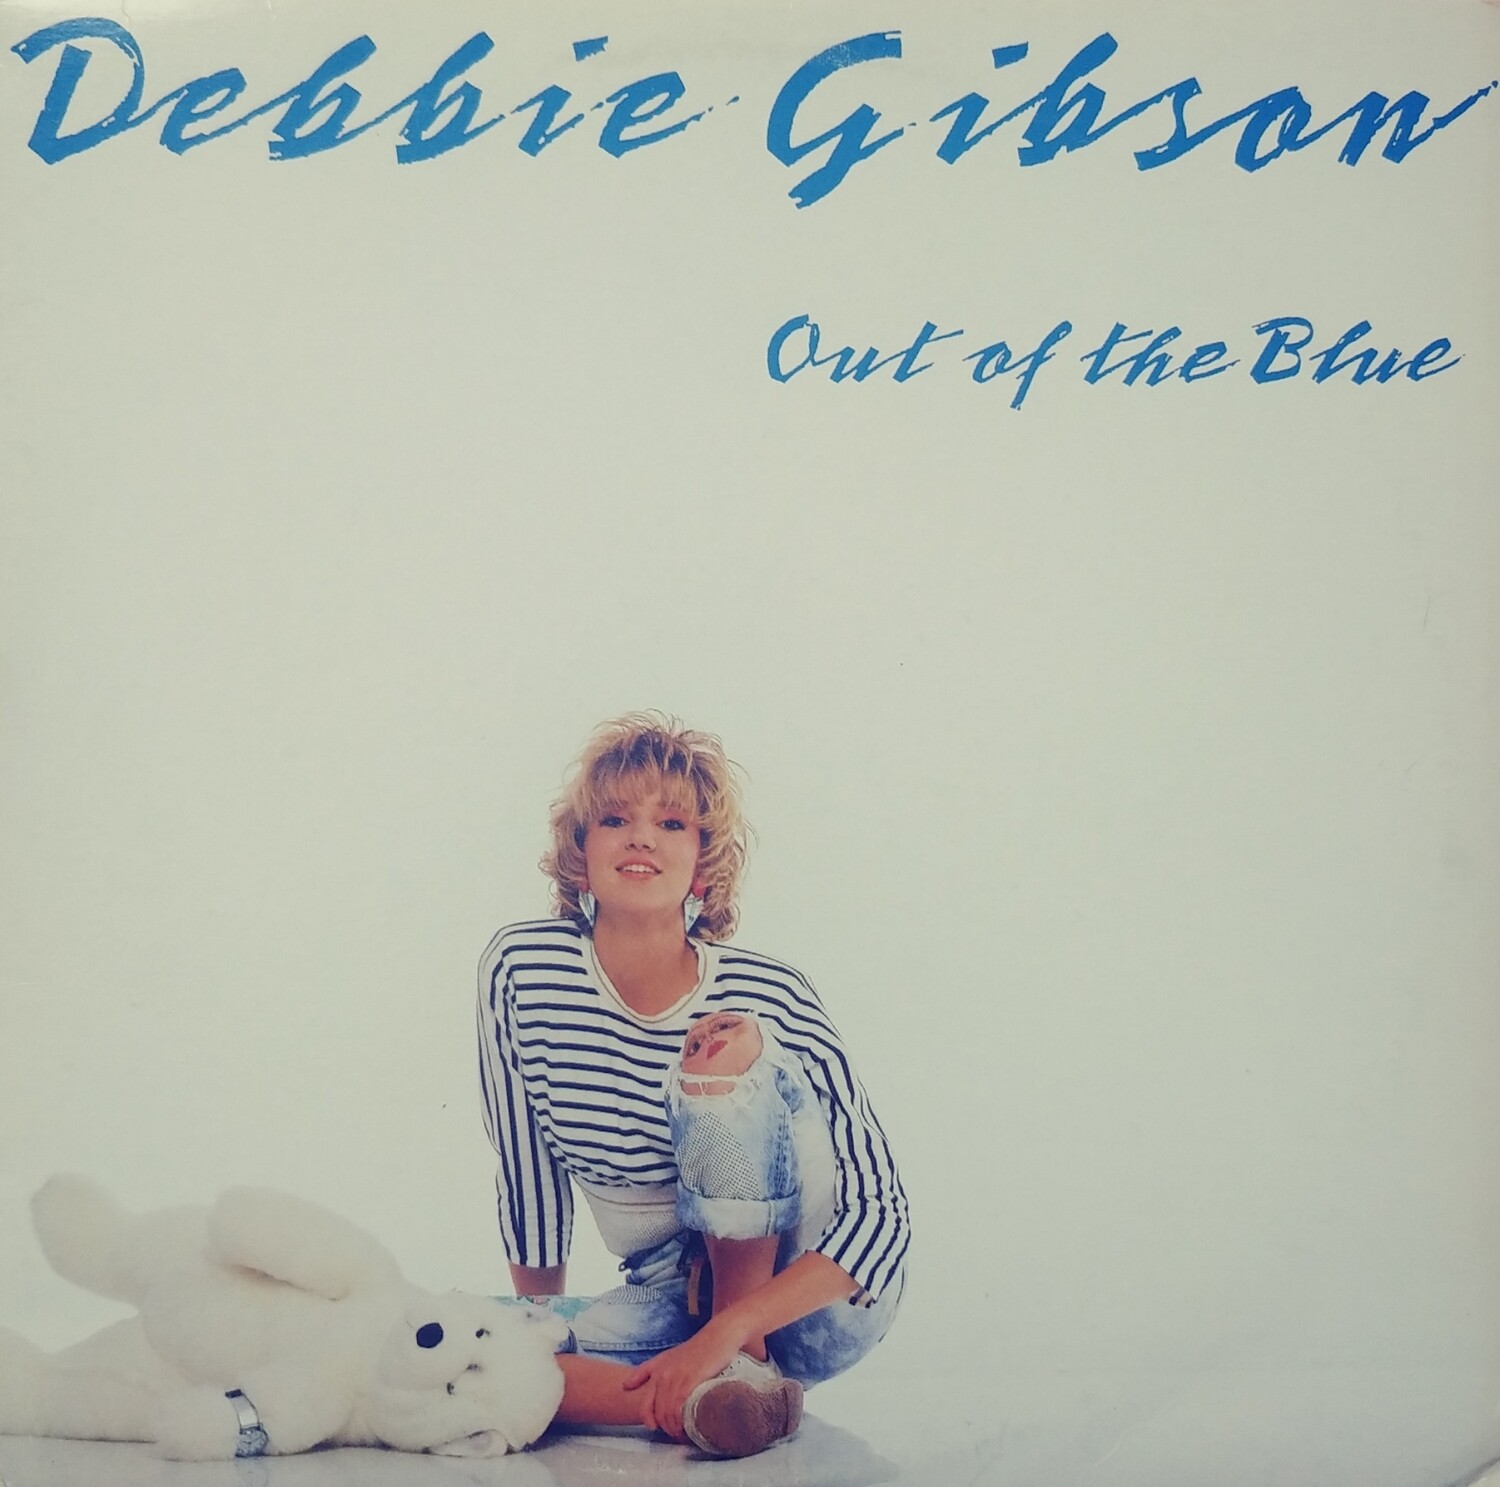 Debbie Gibson - Out of the blue